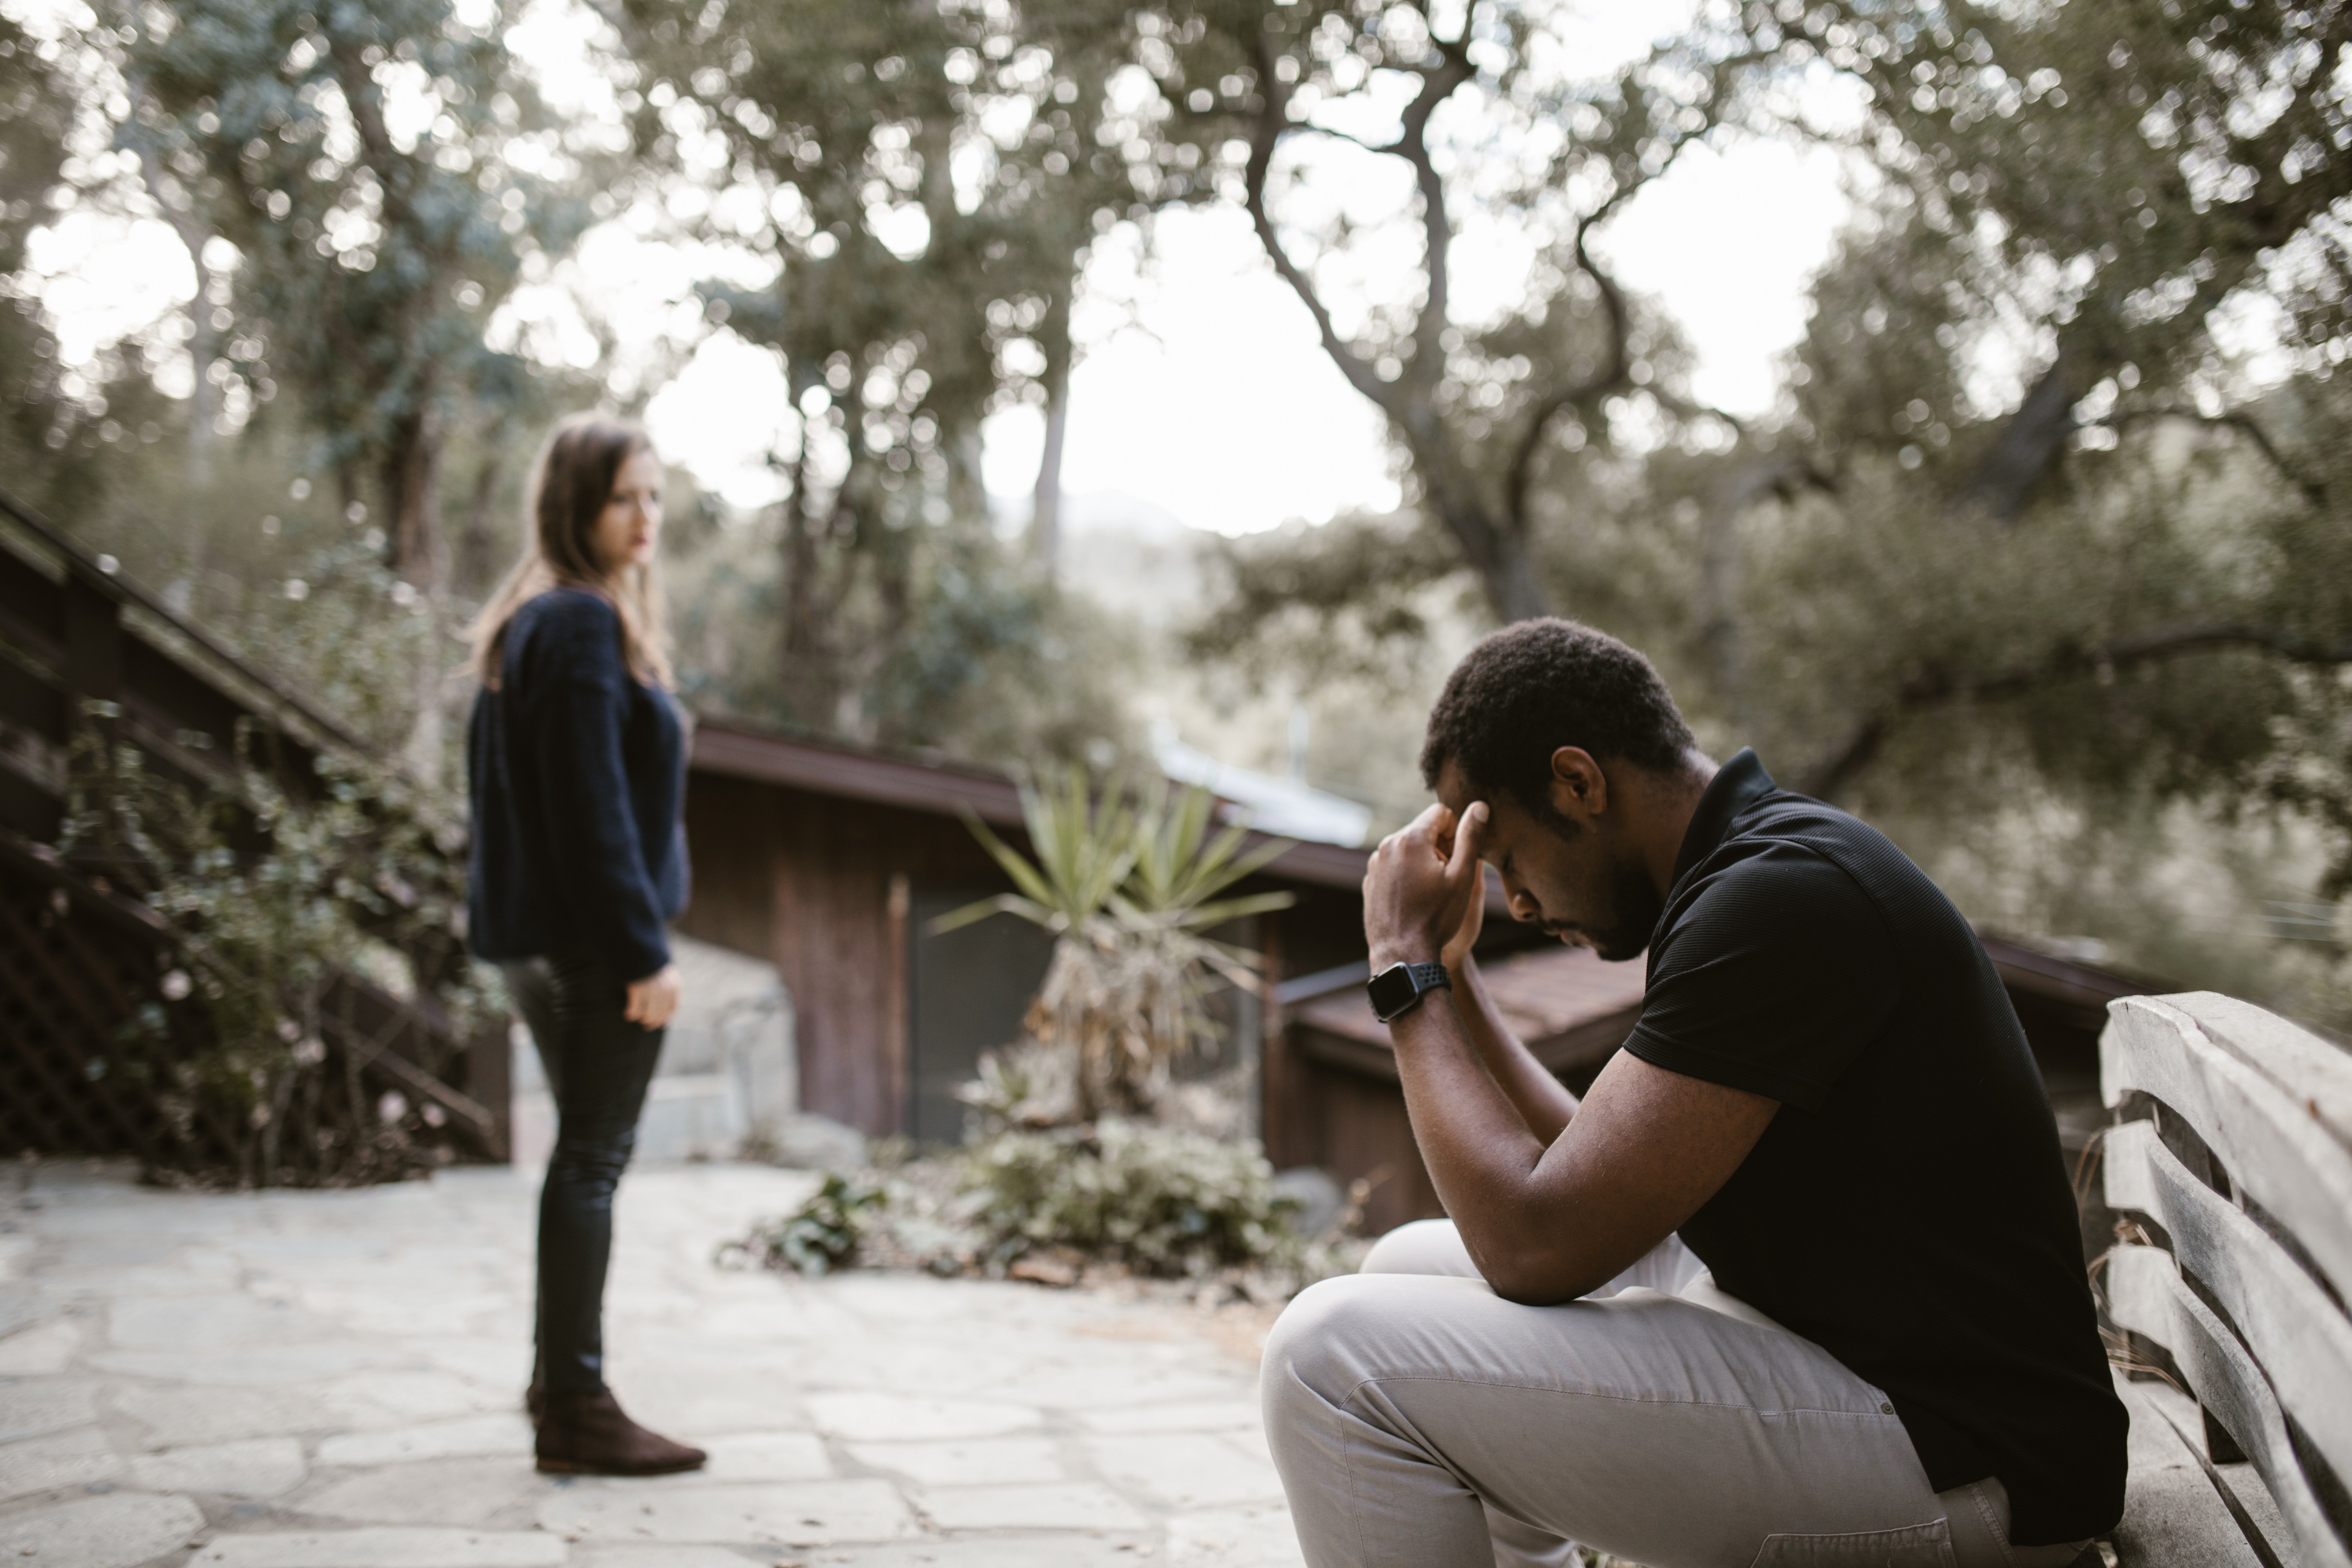 Pictured - A woman looking over a man sitting on a bench looking tense | Source: Pexels 